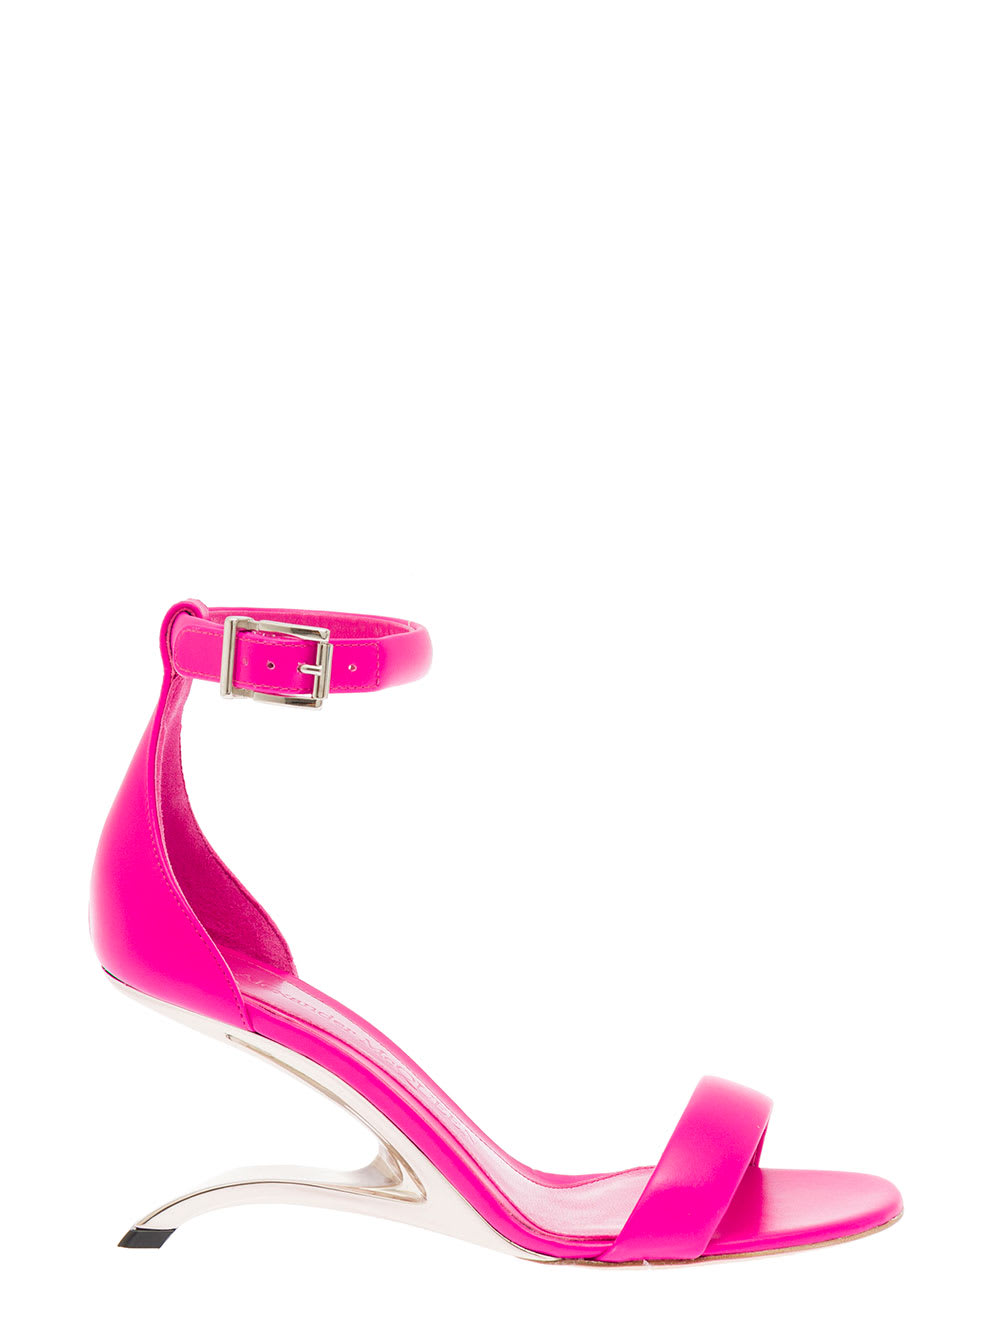 Alexander Mcqueend Womans Arc Bobby Pink Leather Sandals With Structured Heel